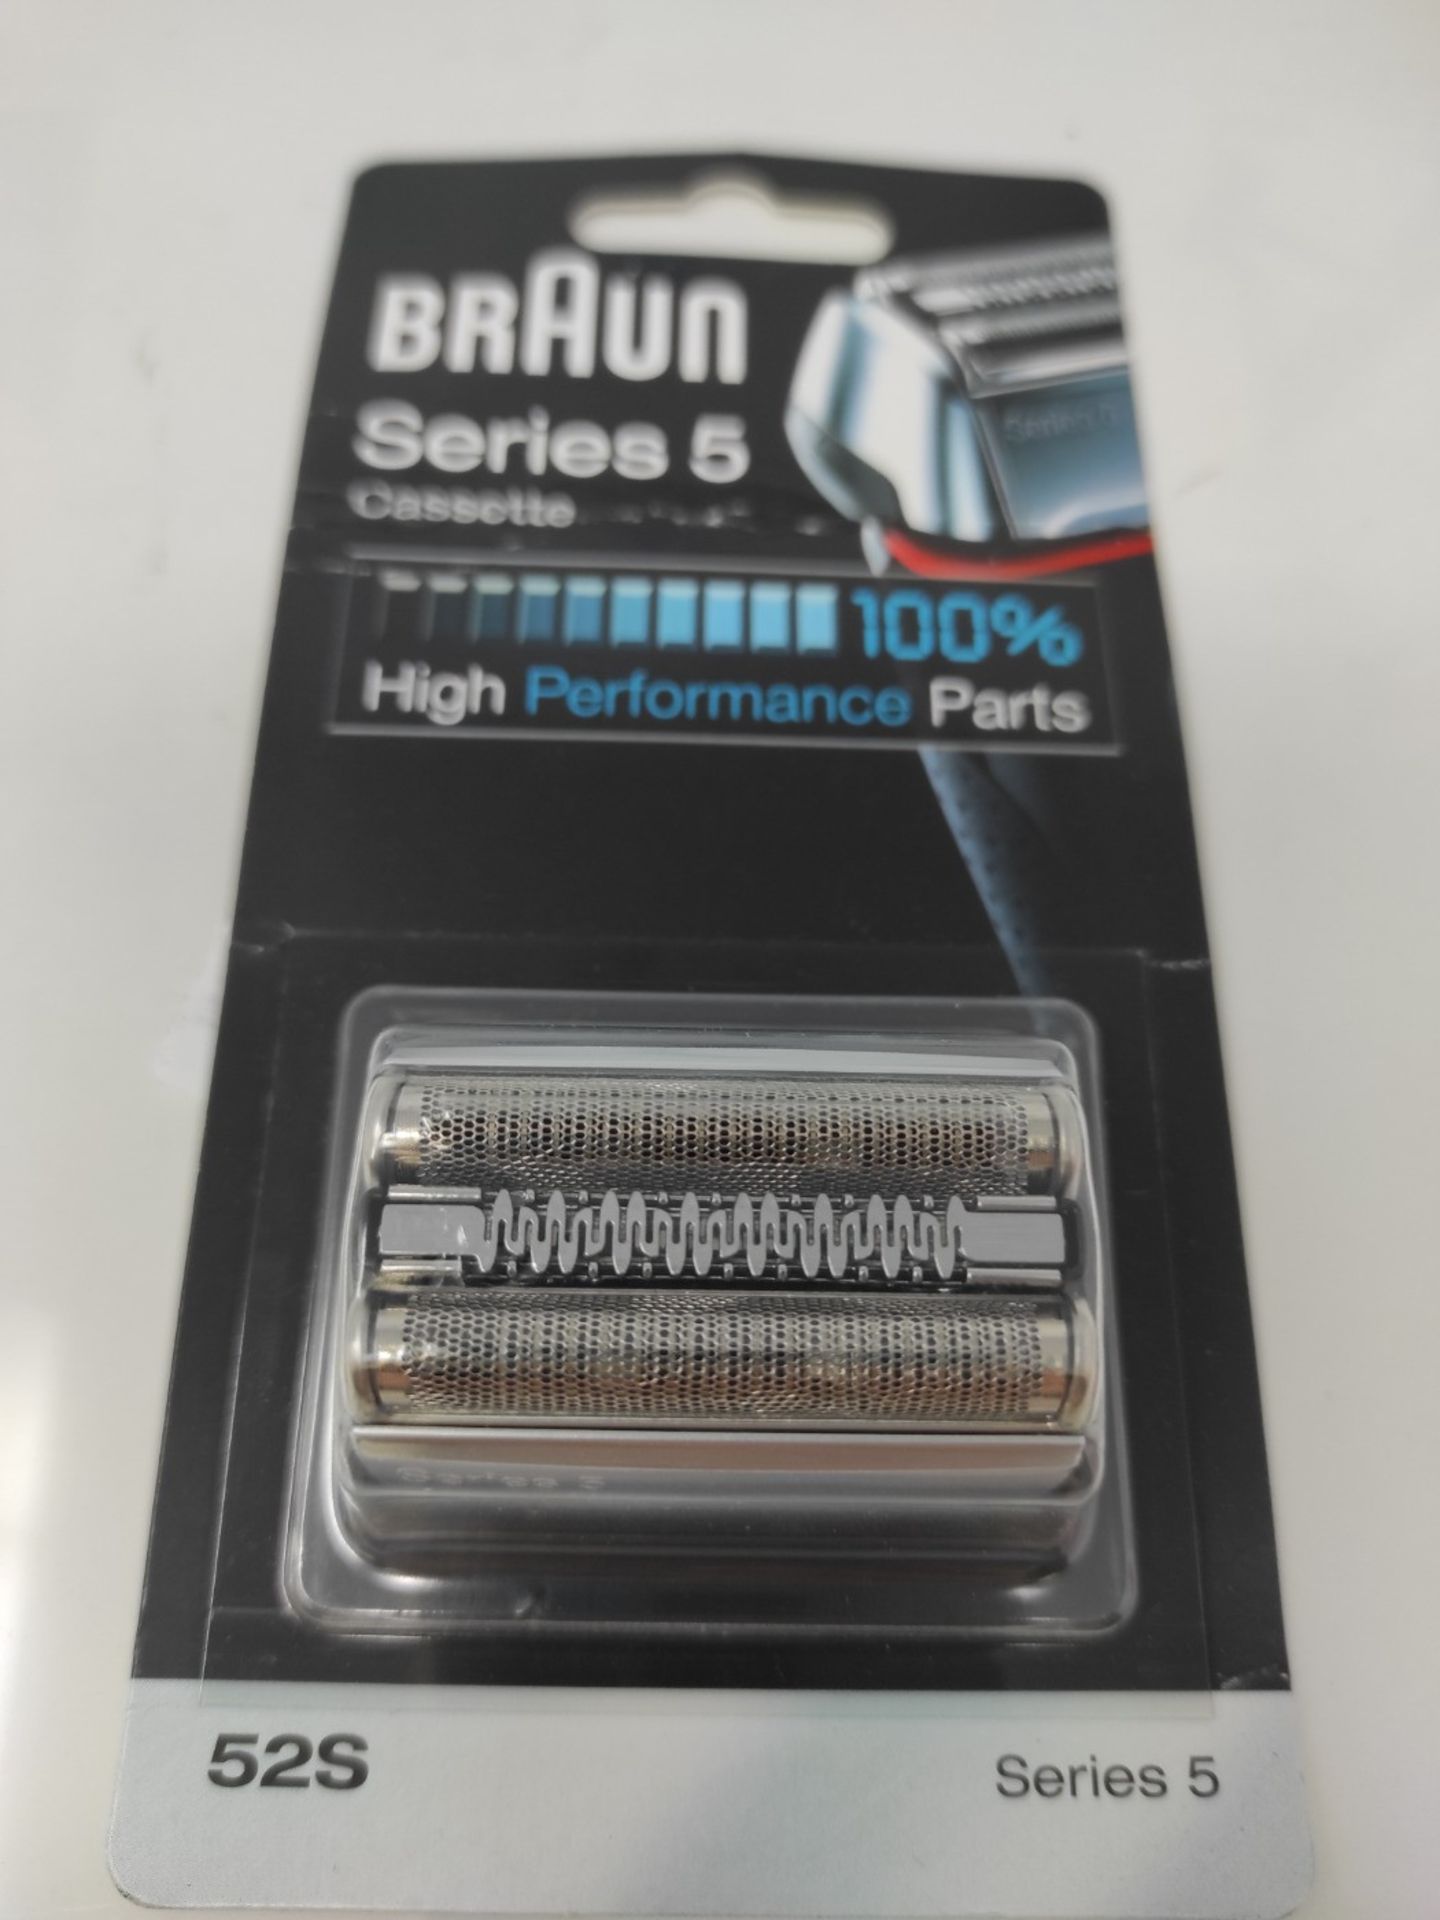 Braun Series 5 Replacement Part for Electric Shaver Silver, Compatible with Series 5 s - Image 2 of 2